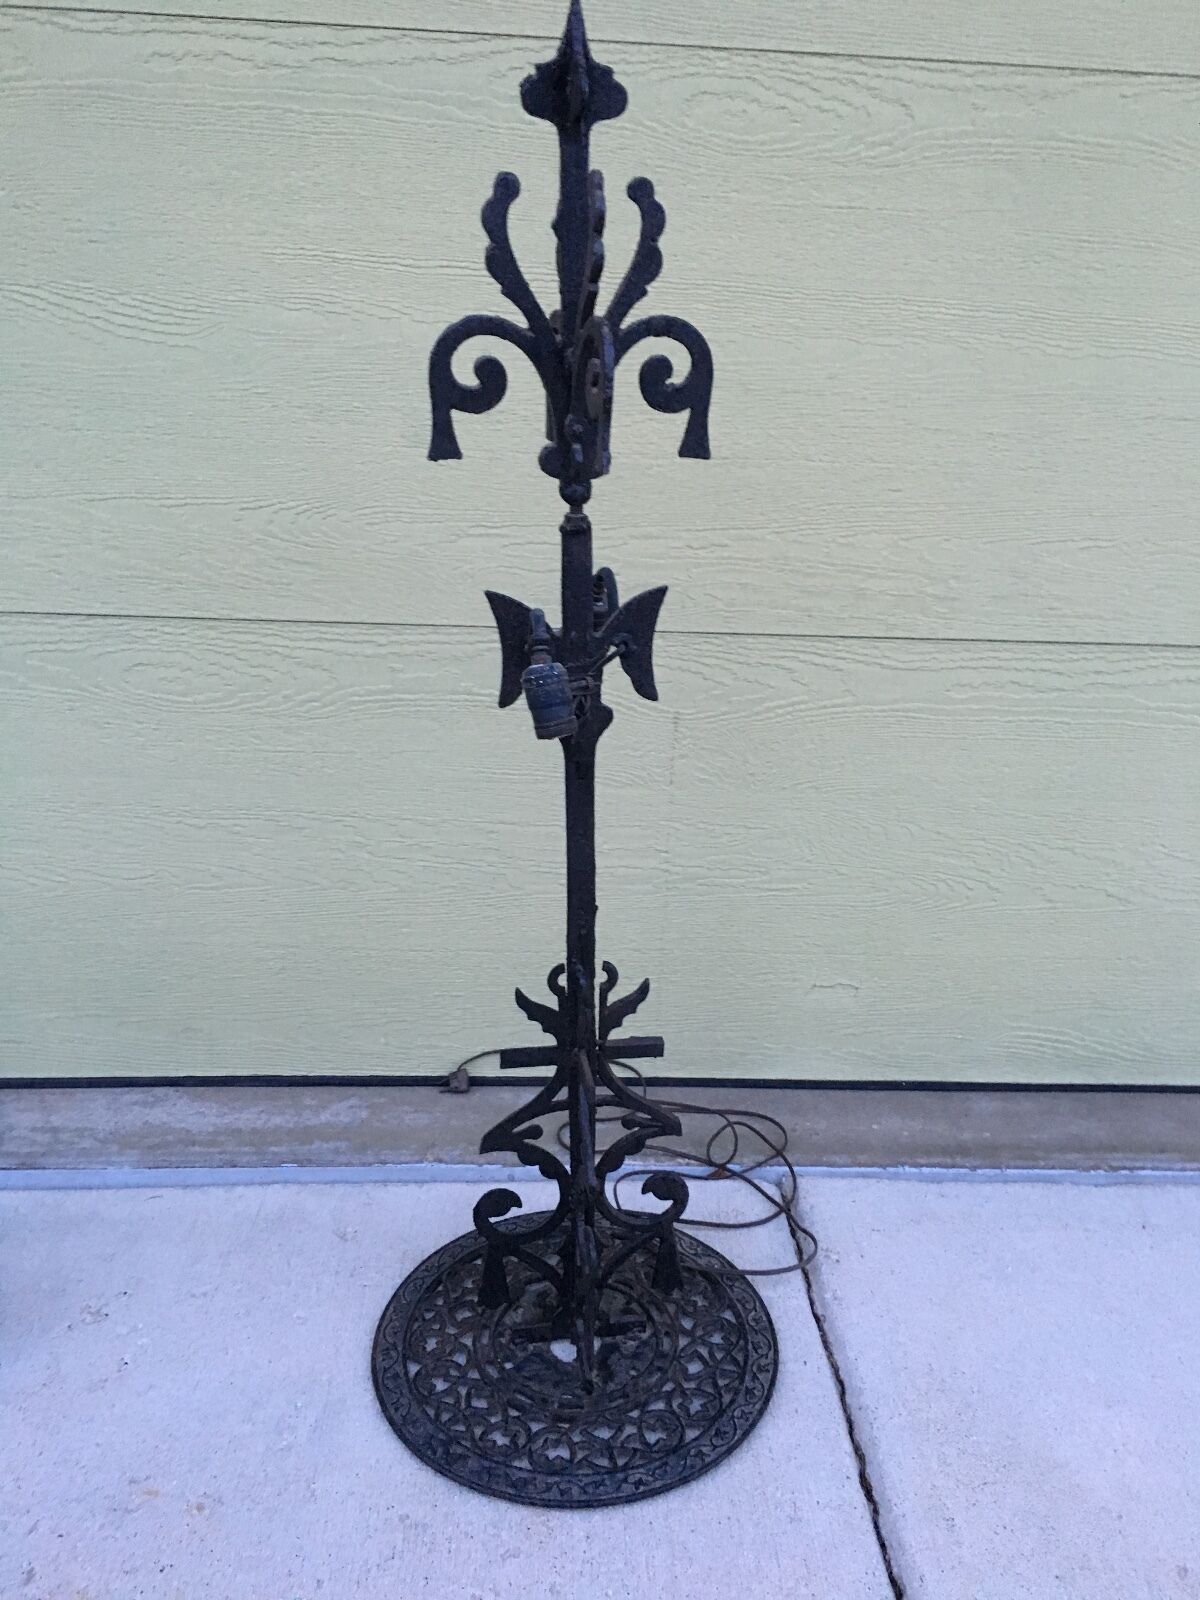 Antique Tall Hand Made Wrought Iron Ornate Victorian Floor Grate Lamp